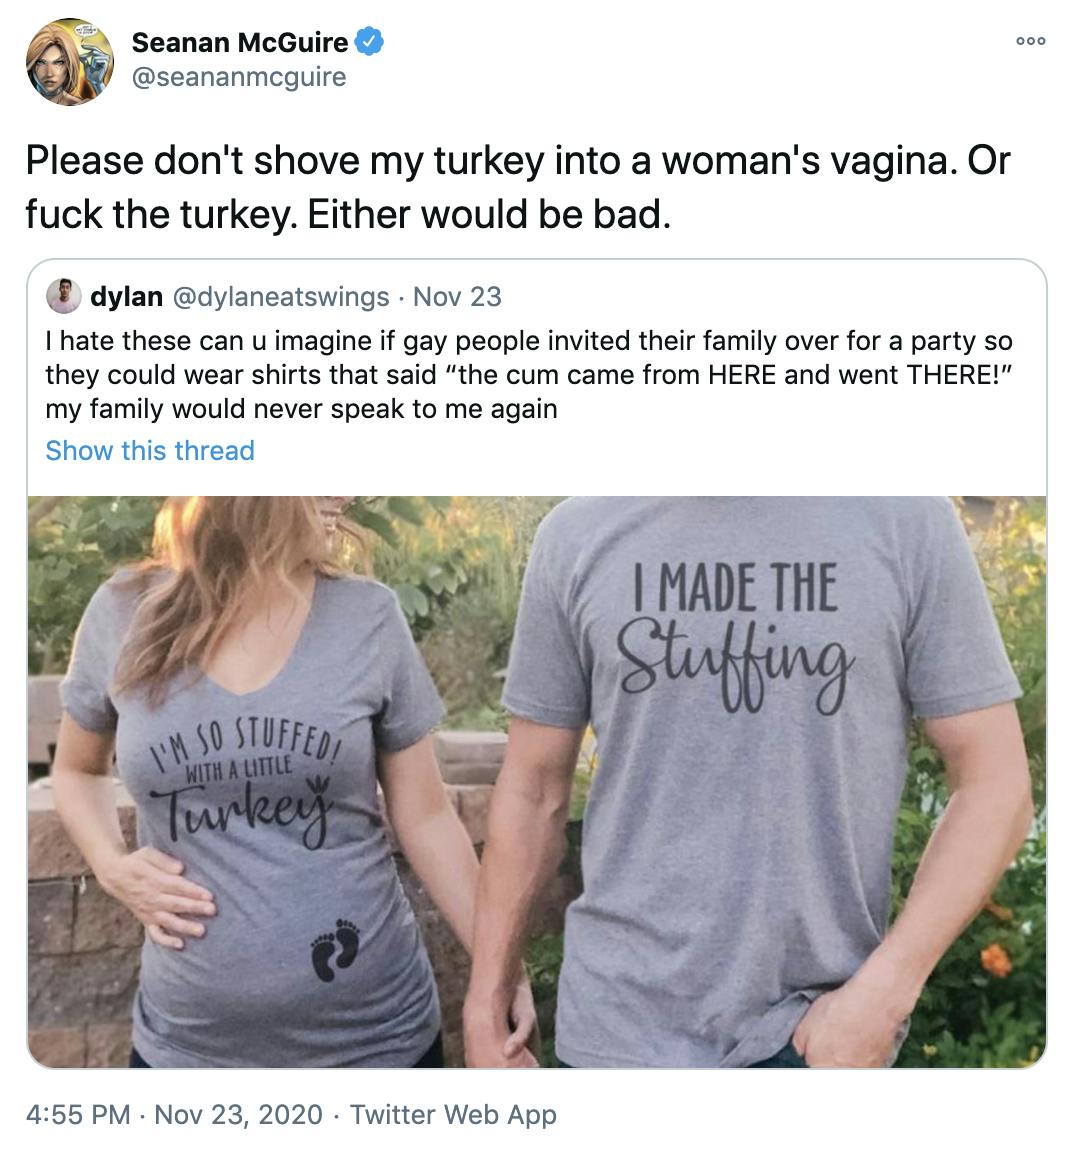 Please don't shove my turkey into a woman's vagina. Or fuck the turkey. Either would be bad.